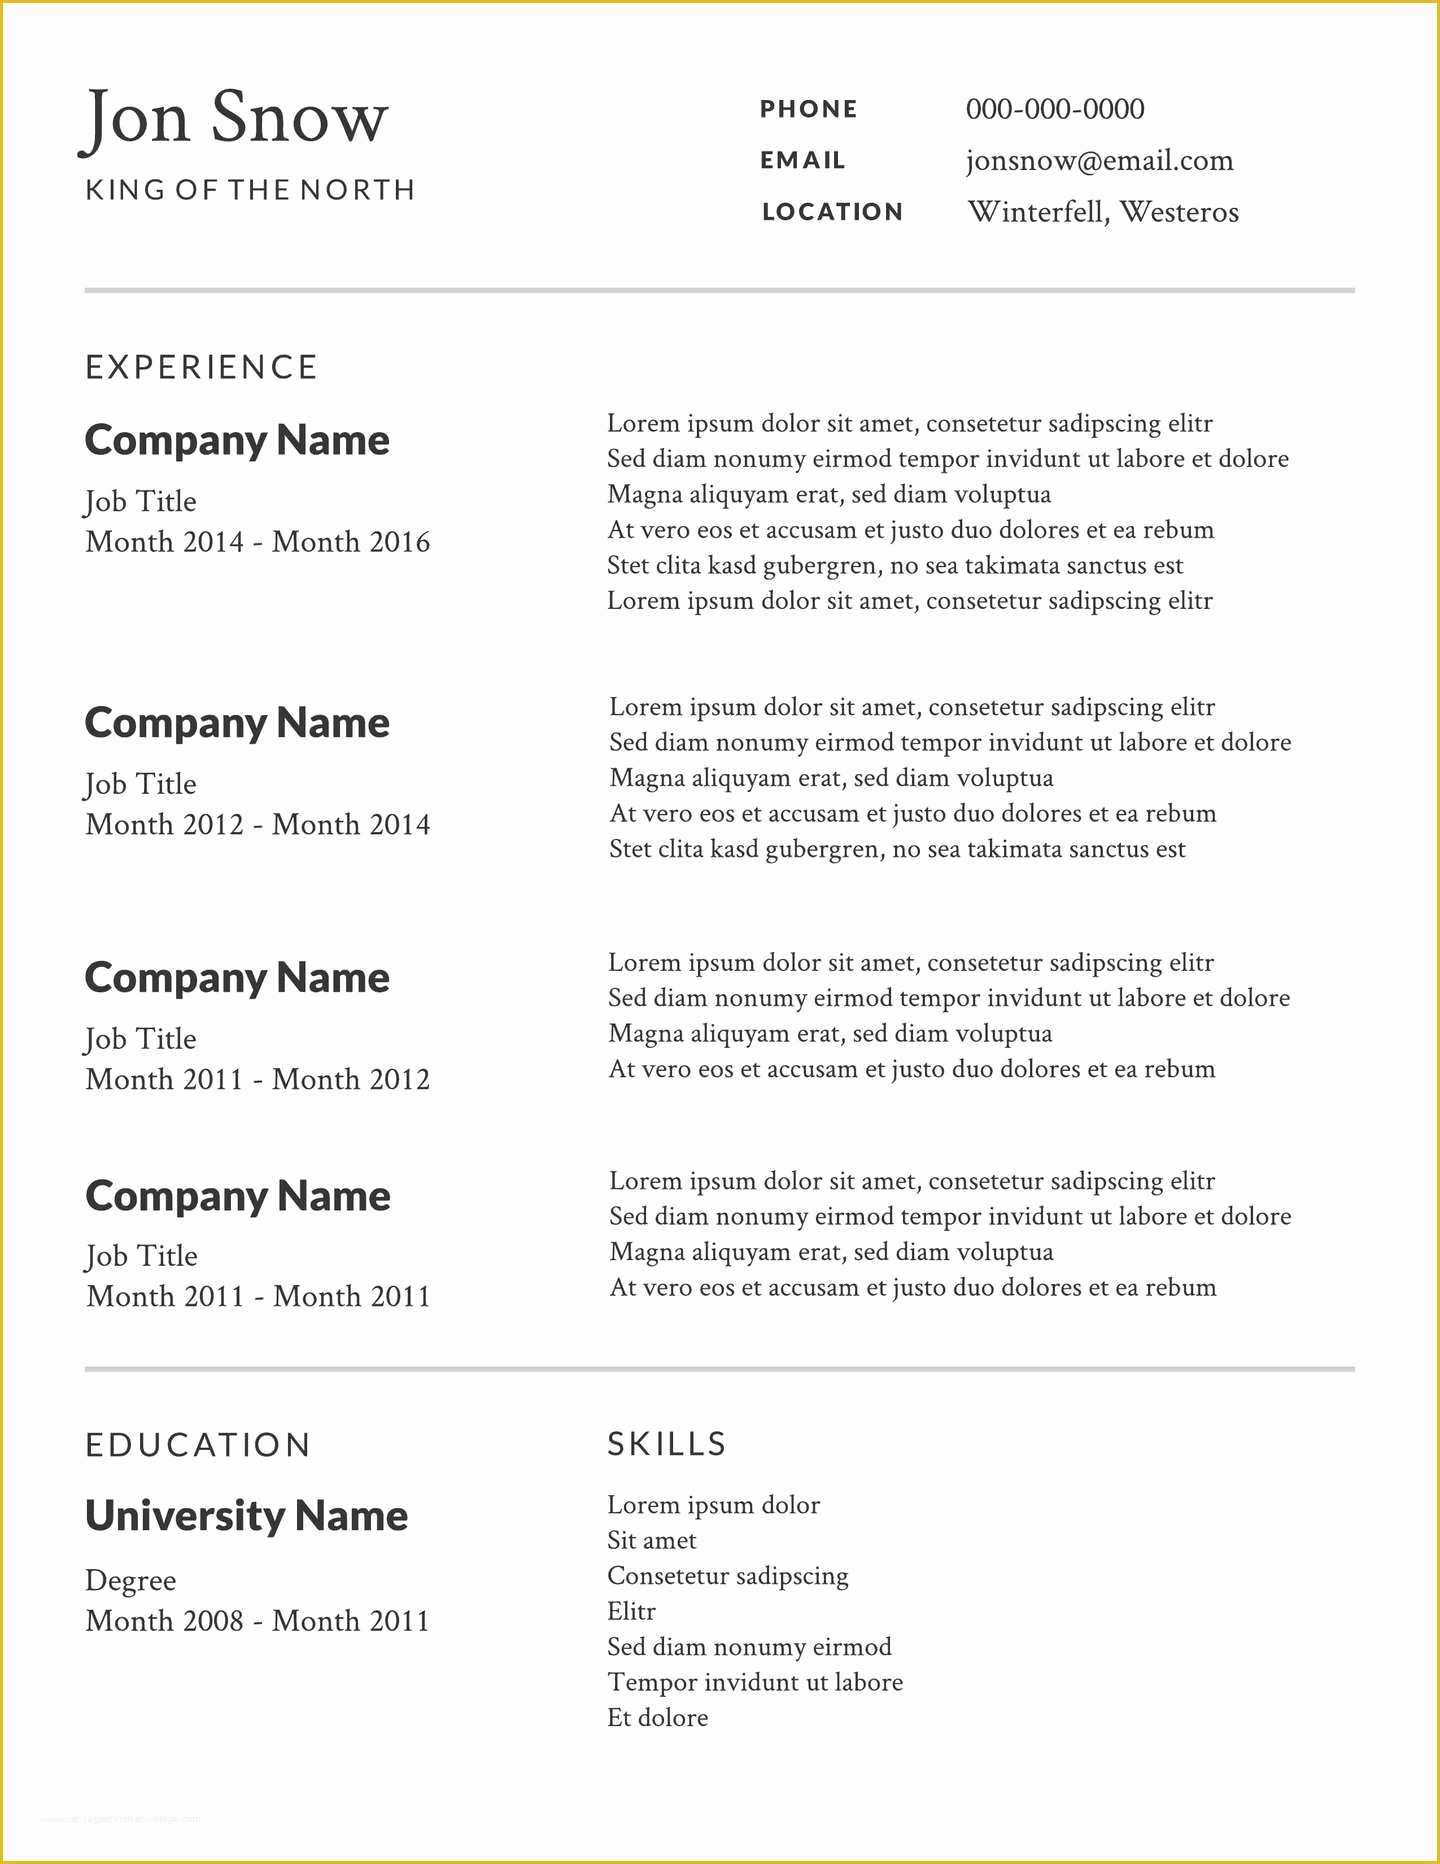 Free Resume Templates Com Of 2 Free Resume Templates & Examples Lucidpress